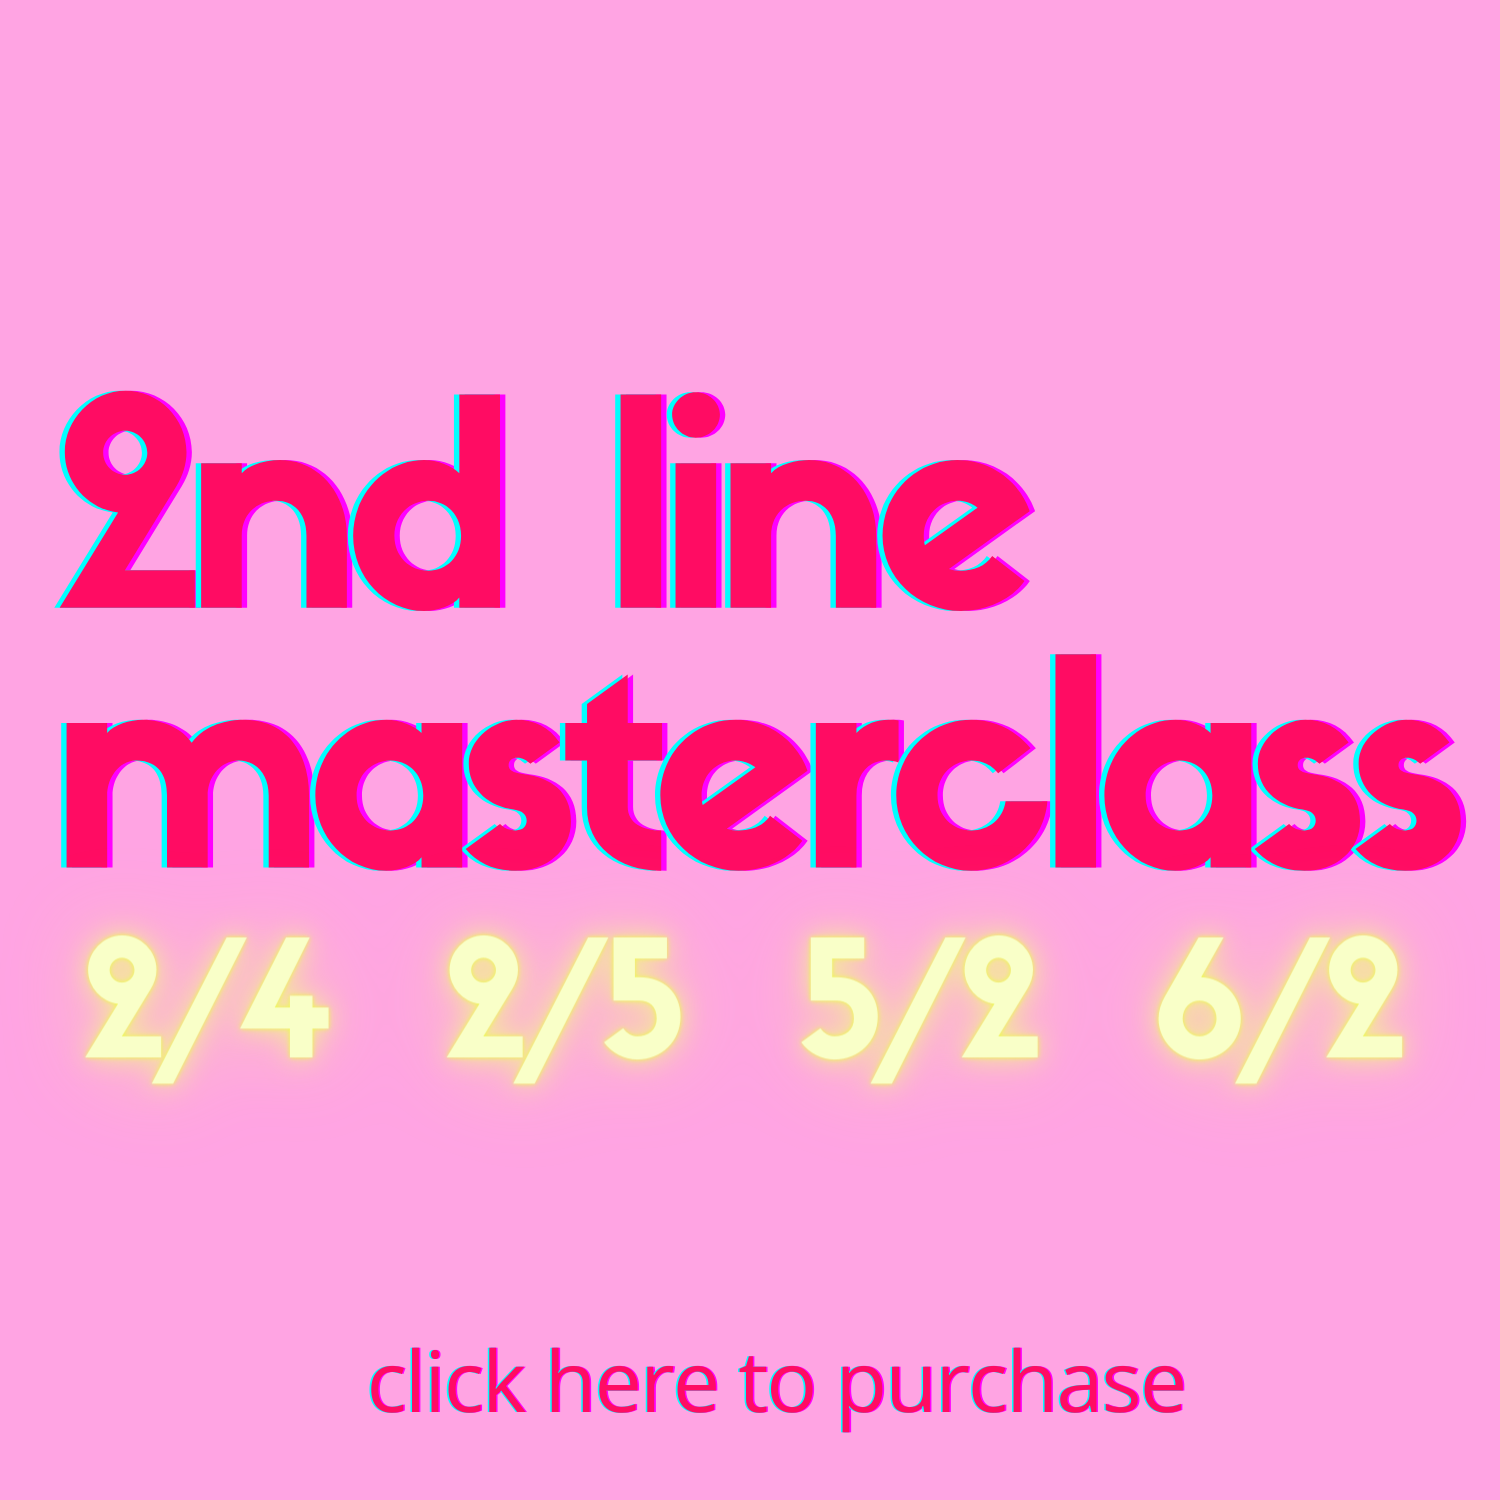 MASTERCLASSES 2nd line.png